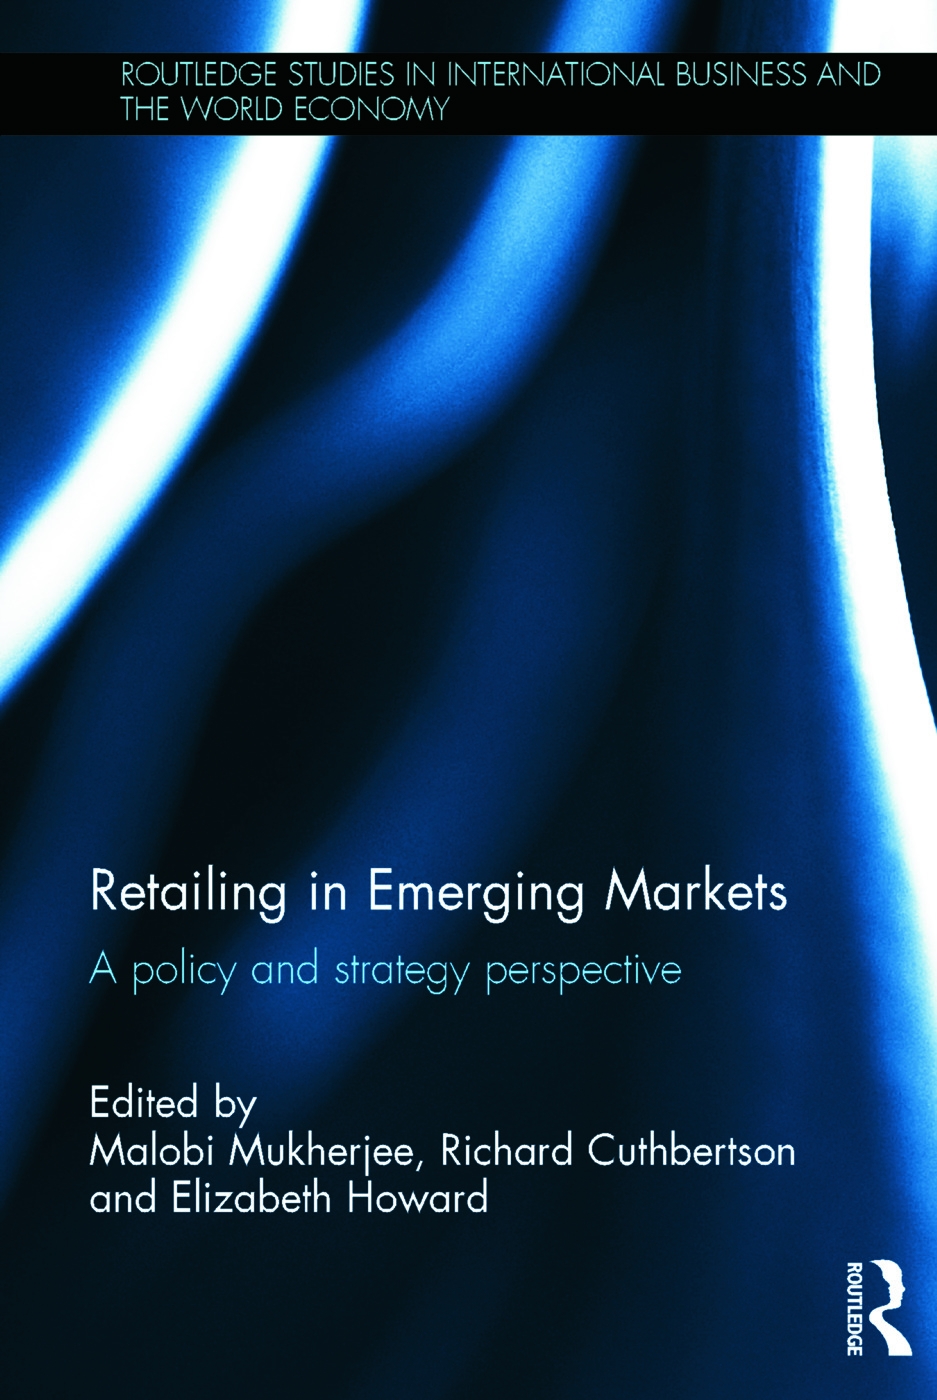 Retailing in Emerging Markets: A Policy and Strategy Perspective